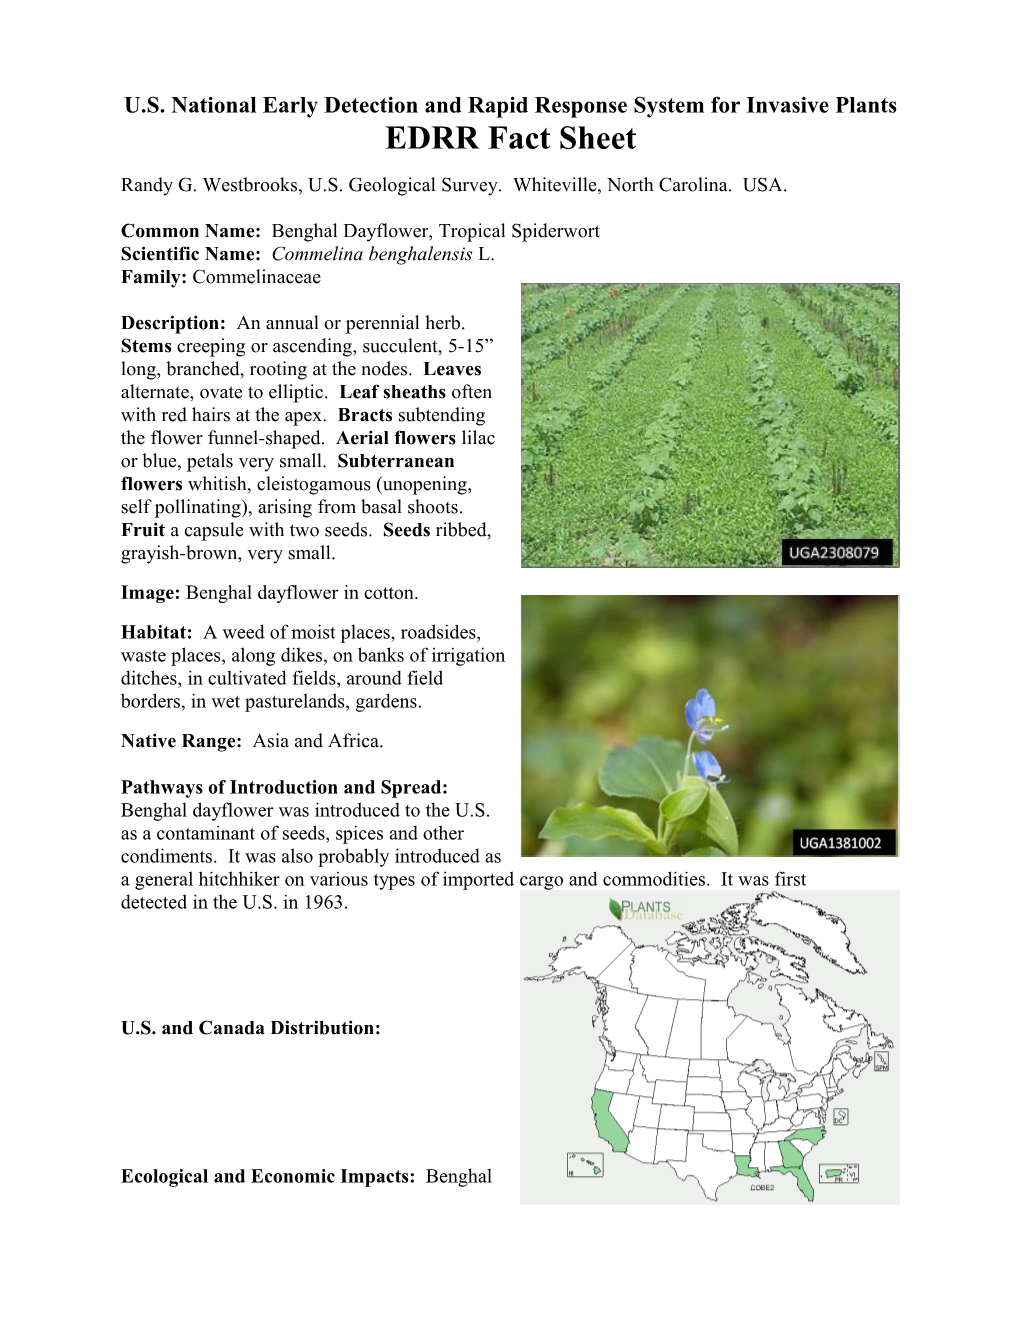 U.S. National Early Detection and Rapid Response System for Invasive Plants EDRR Fact Sheet